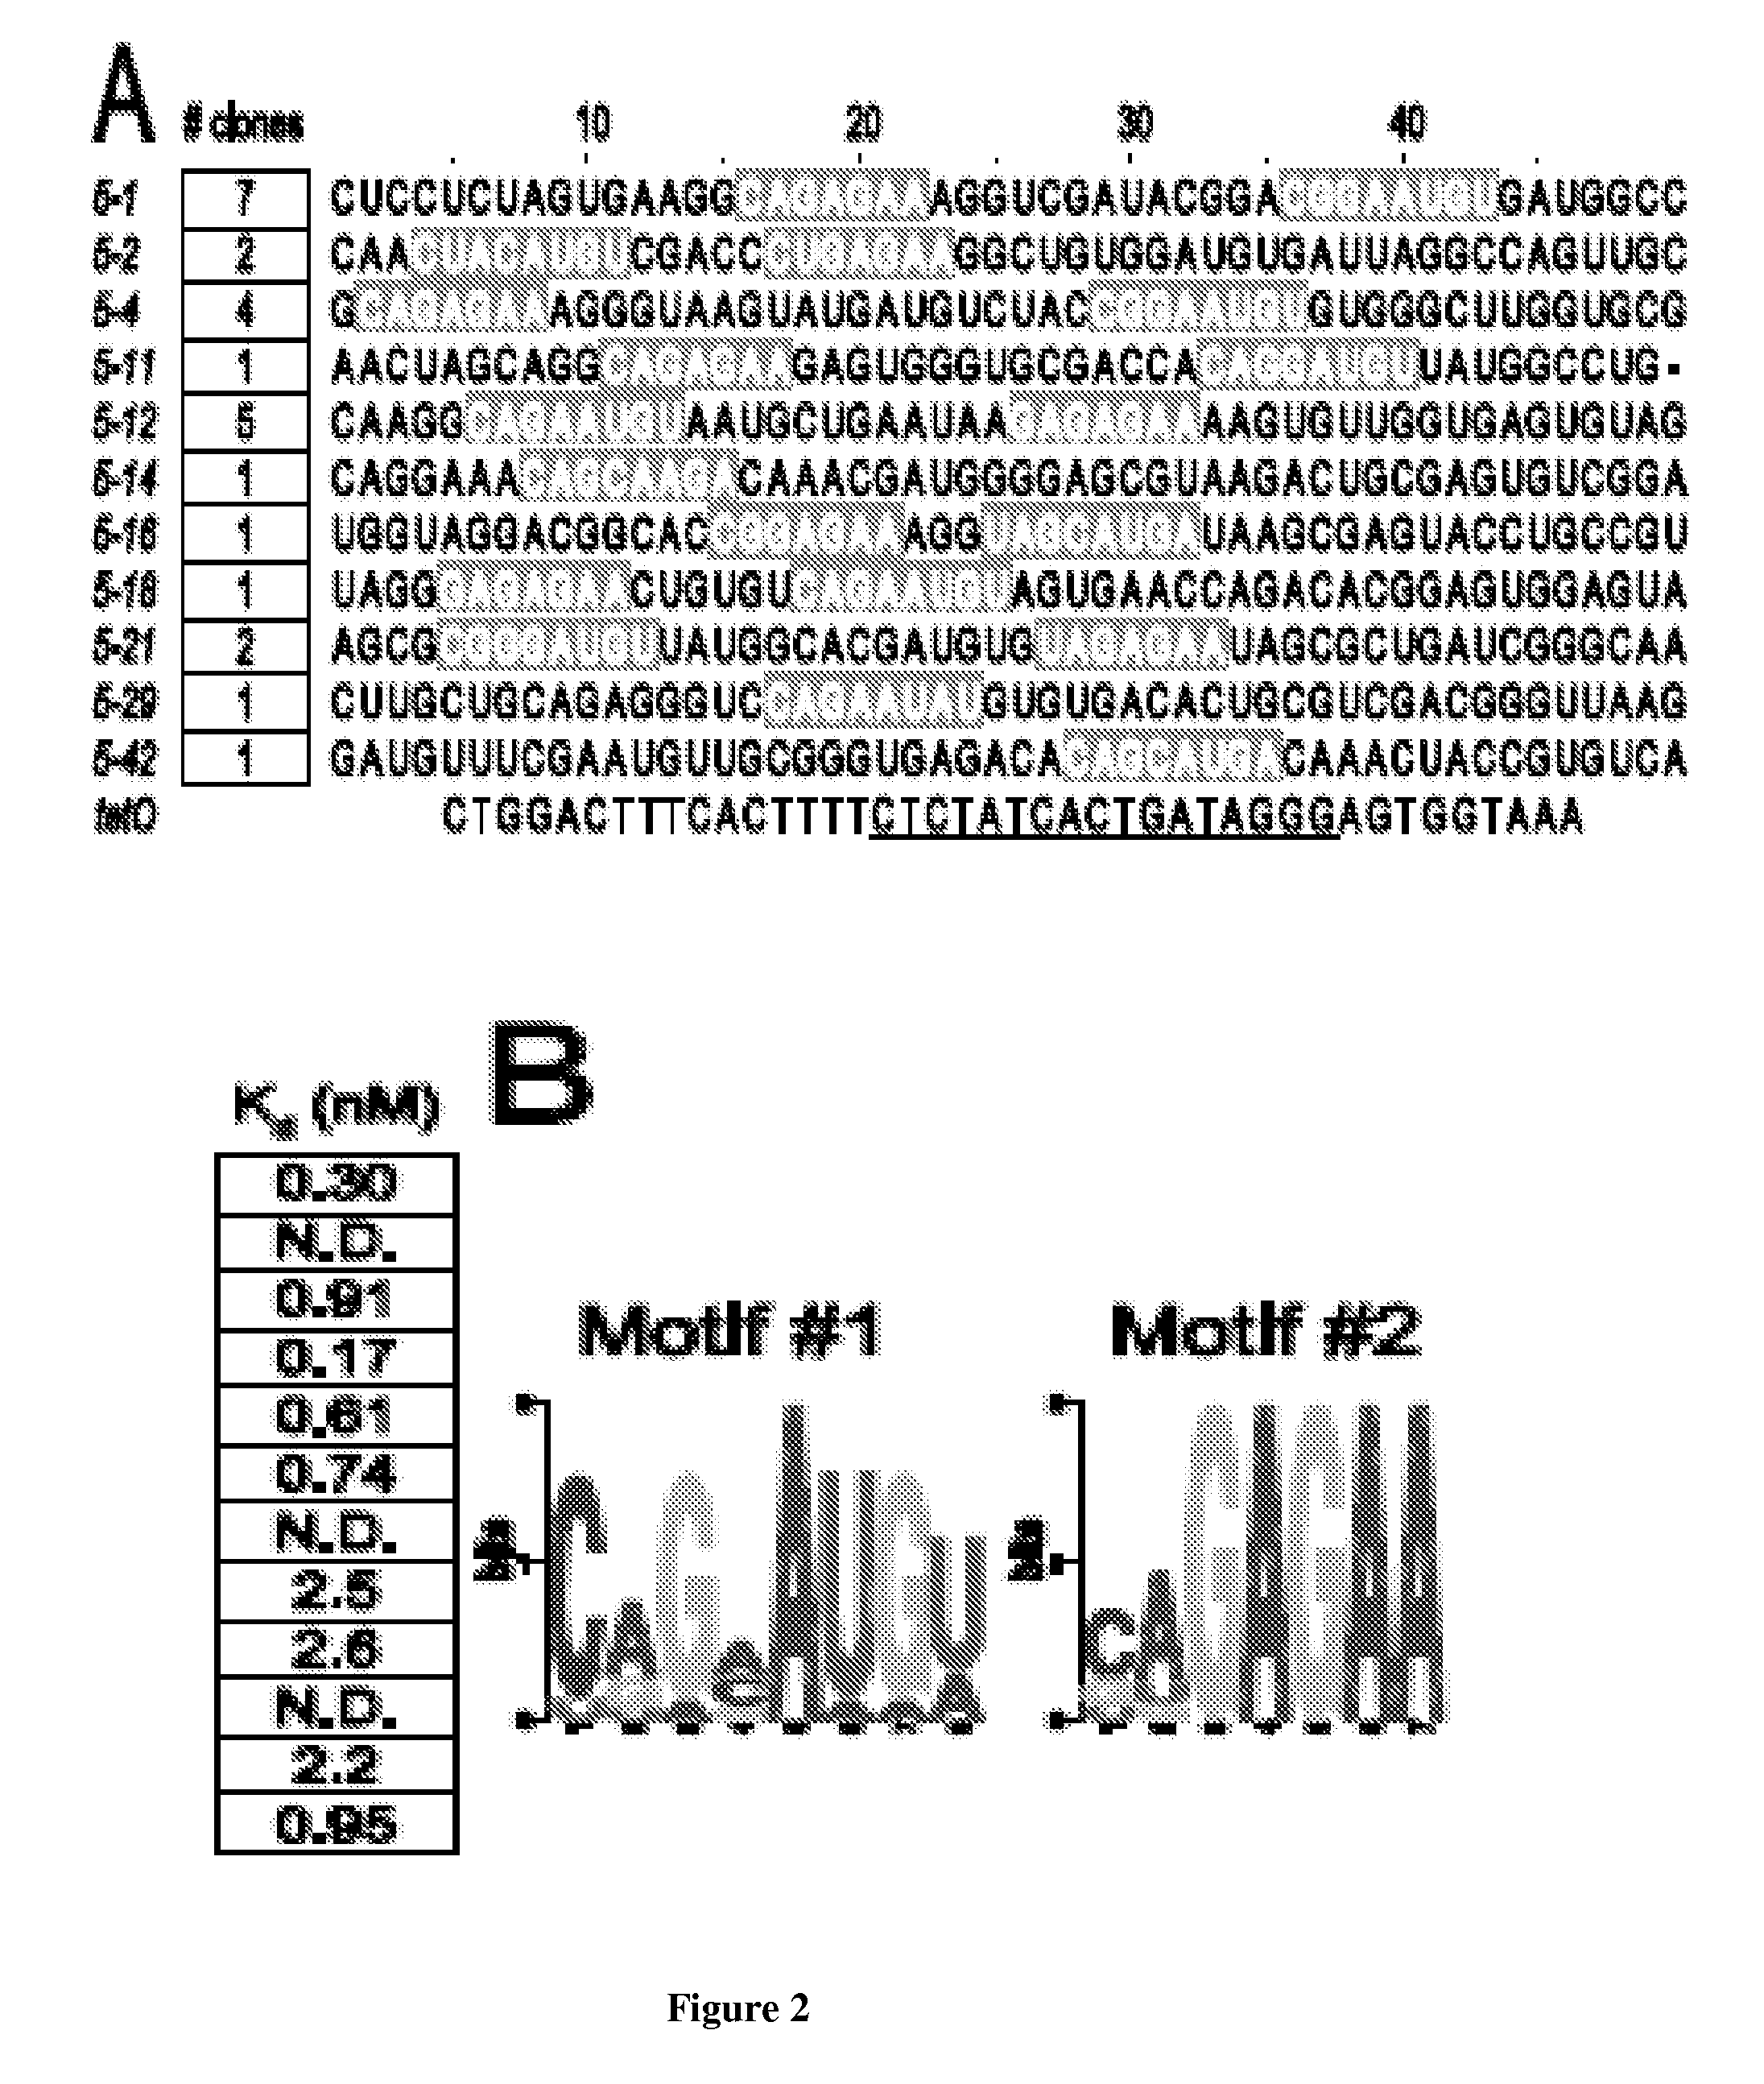 Post-Transcriptional Regulation Of RNA-Related Processes Using Encoded Protein-Binding RNA Aptamers